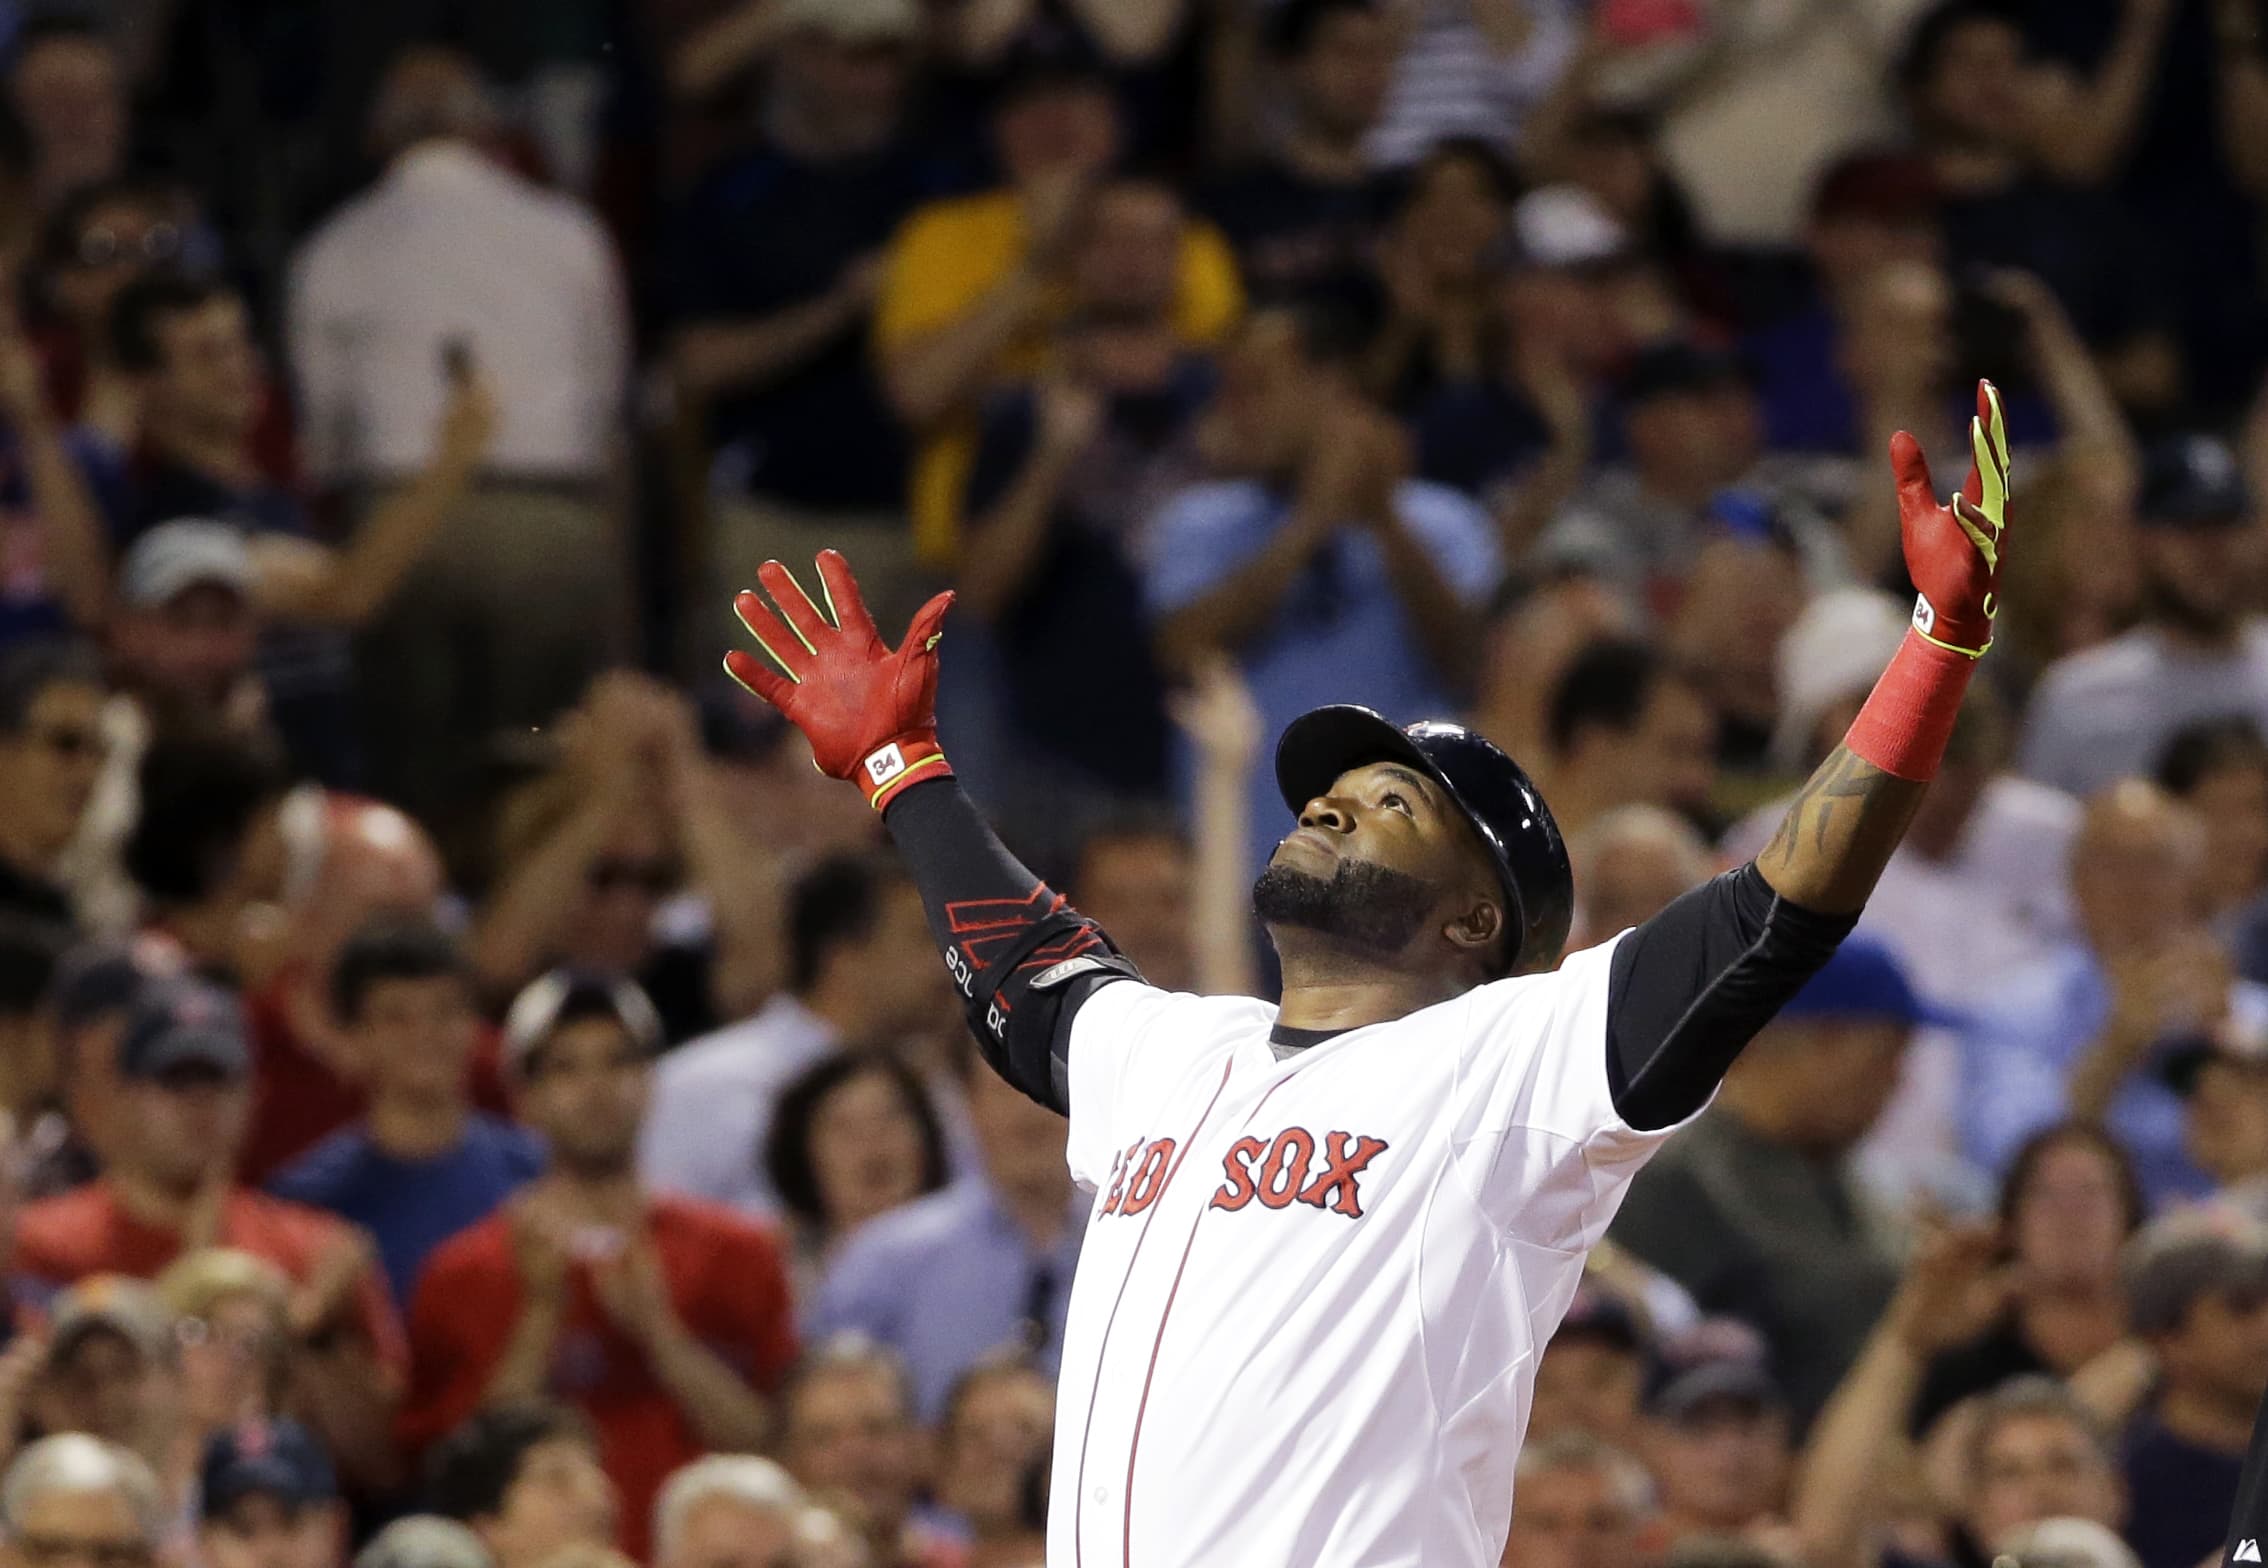 Boston Red Sox designated hitter David Ortiz reacts as he crosses home plate after hitting a two-run home run at Fenway Park in 2015(Elise Amendola/AP)